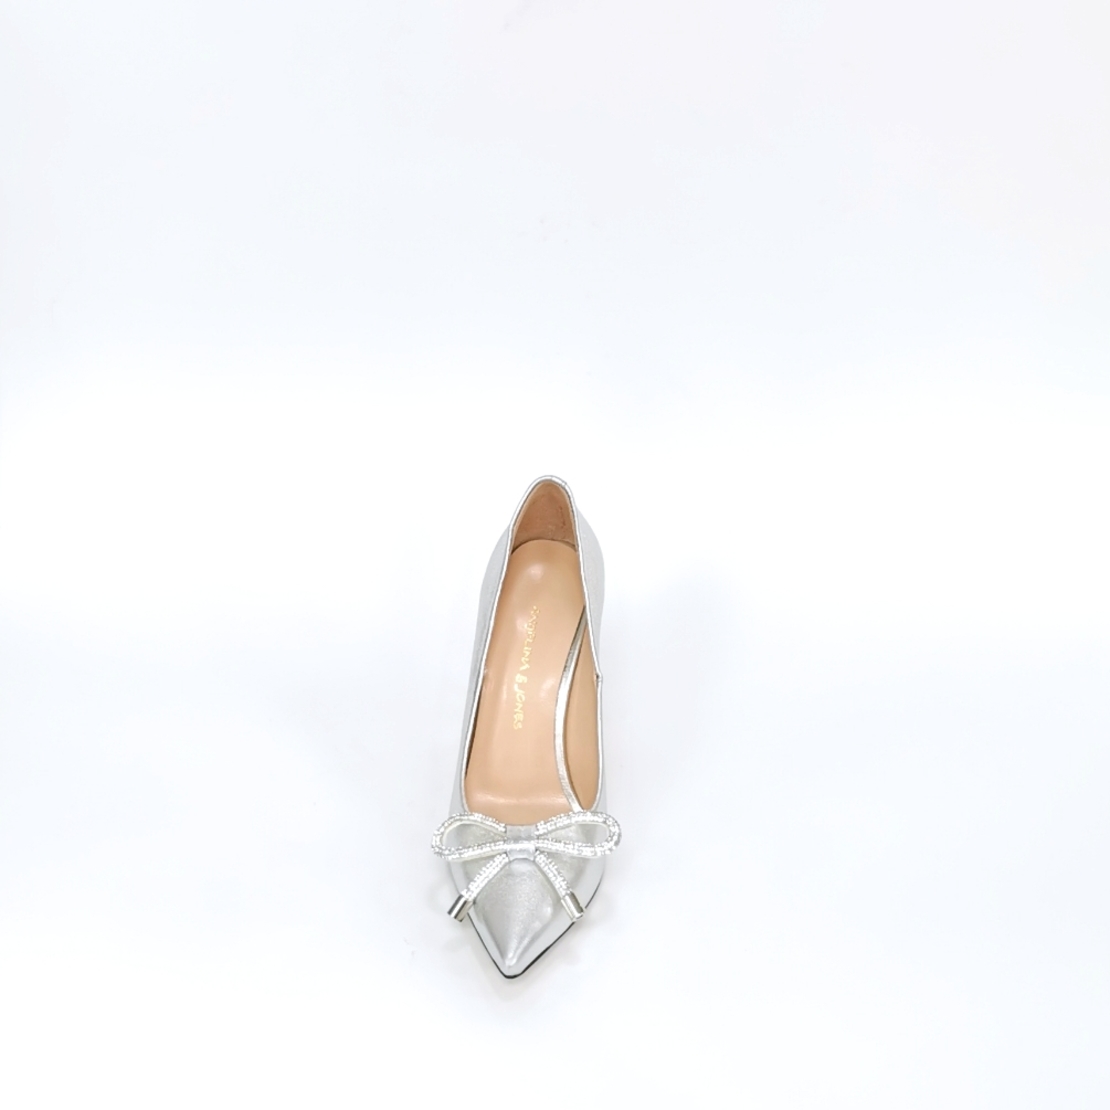 Women's elegant shoes made of natural leather in silver /73346